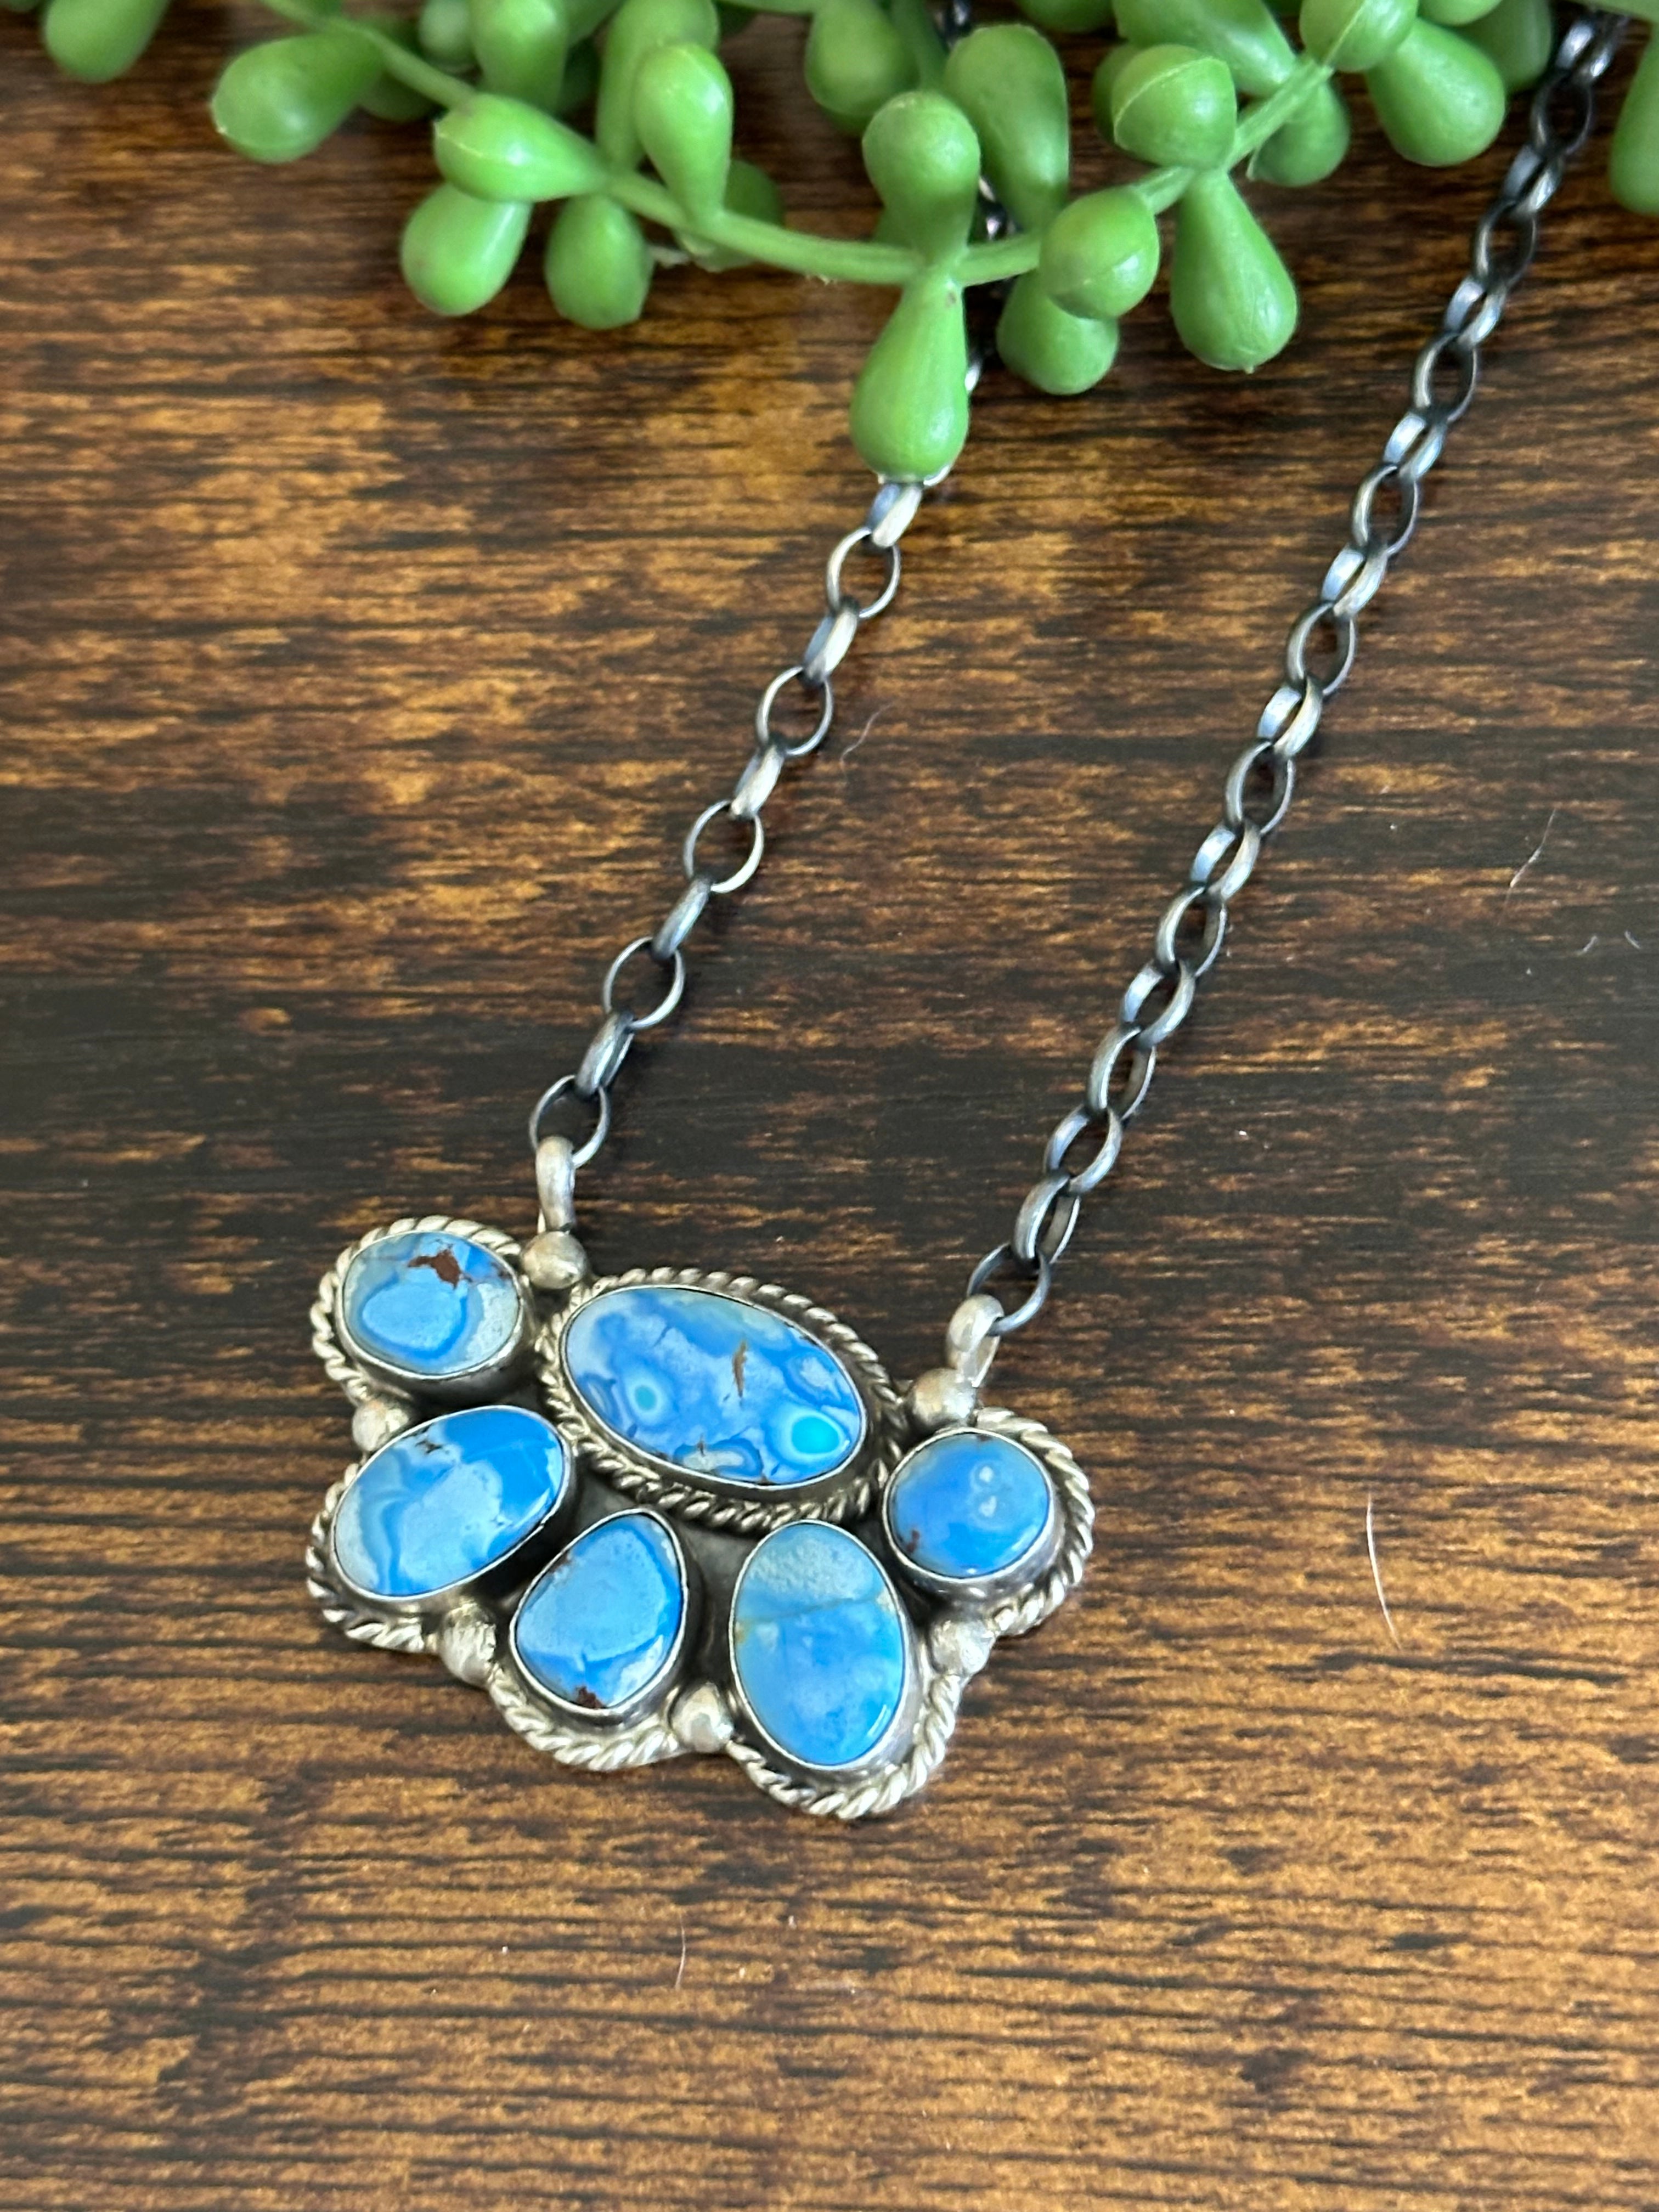 Augustine Largo Golden Hills Turquoise & Sterling Silver Necklace